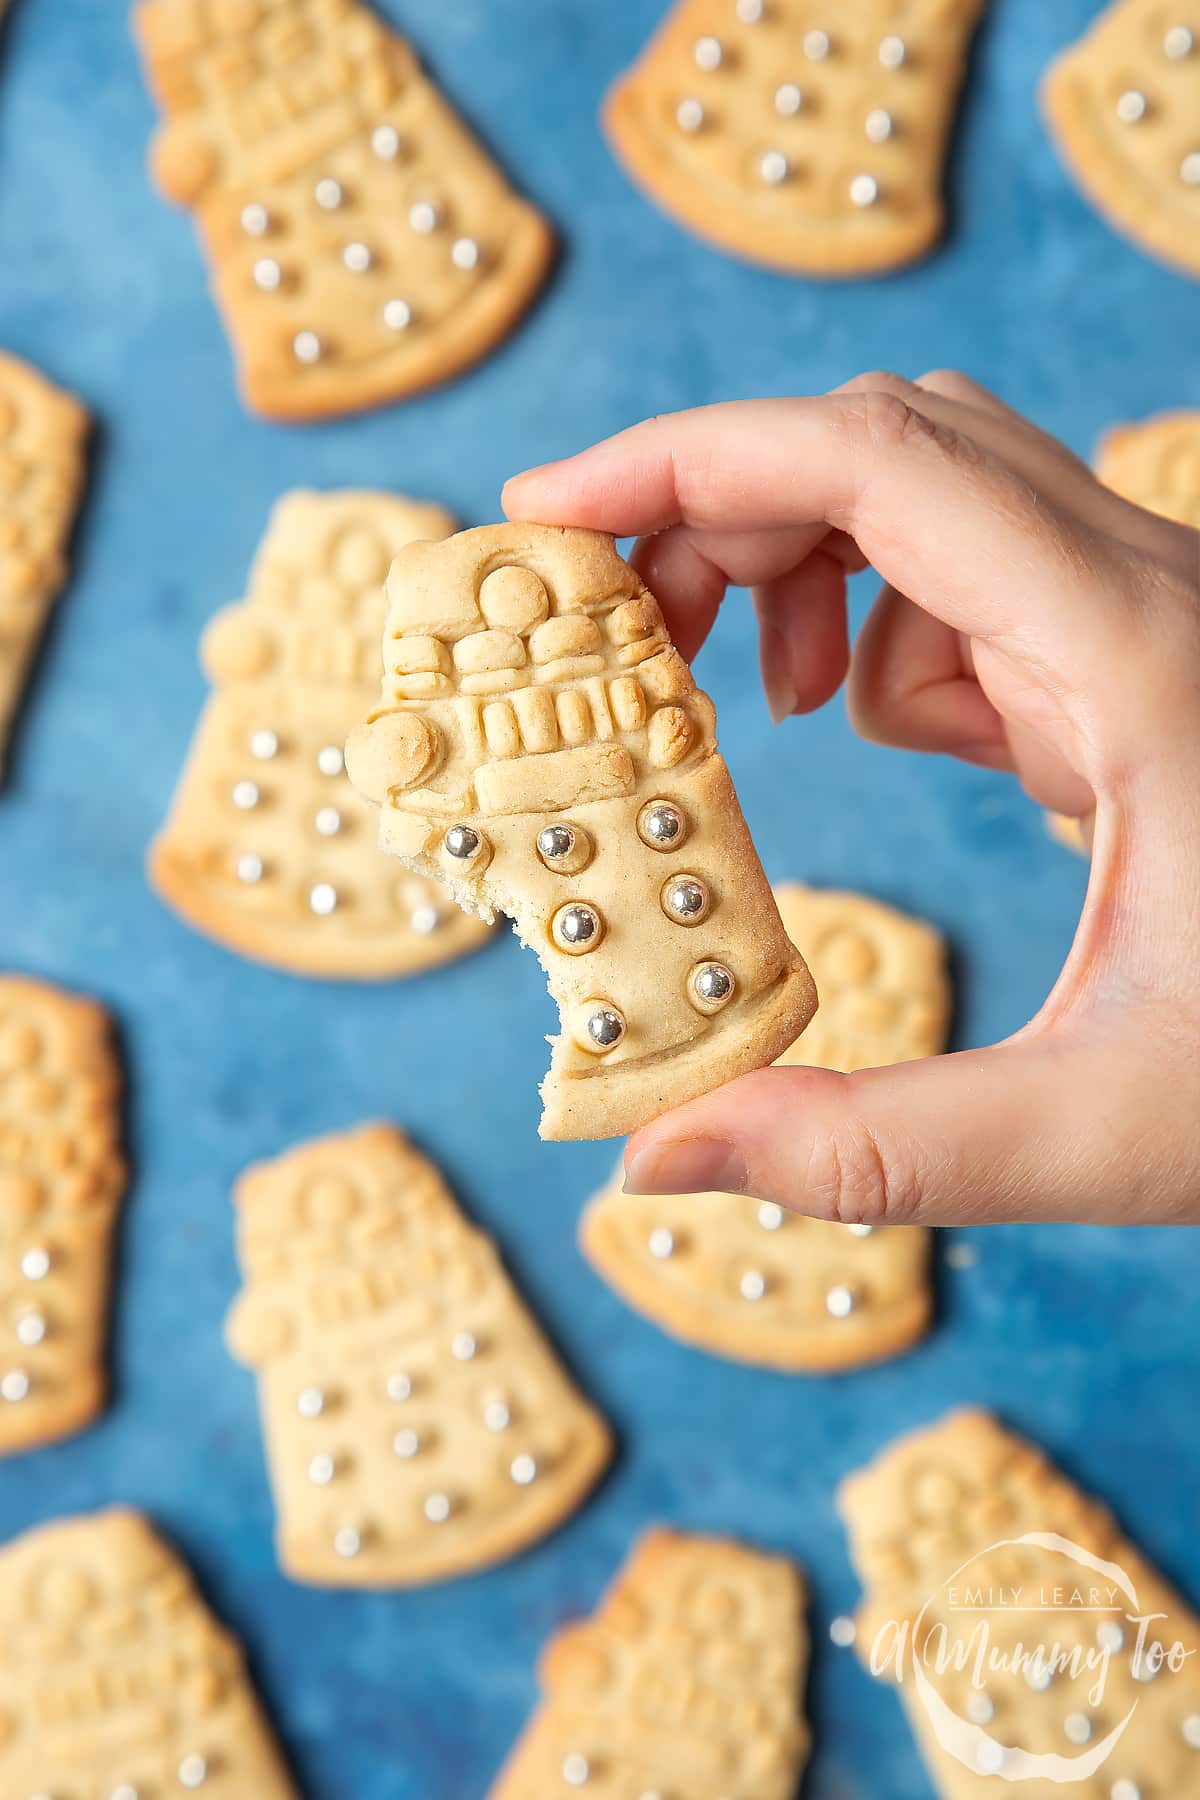 Dalek cookies on a blue background. The cookies are decorated with edible silver candy balls. A hand holds one of the cookies, which has a bite out of it.